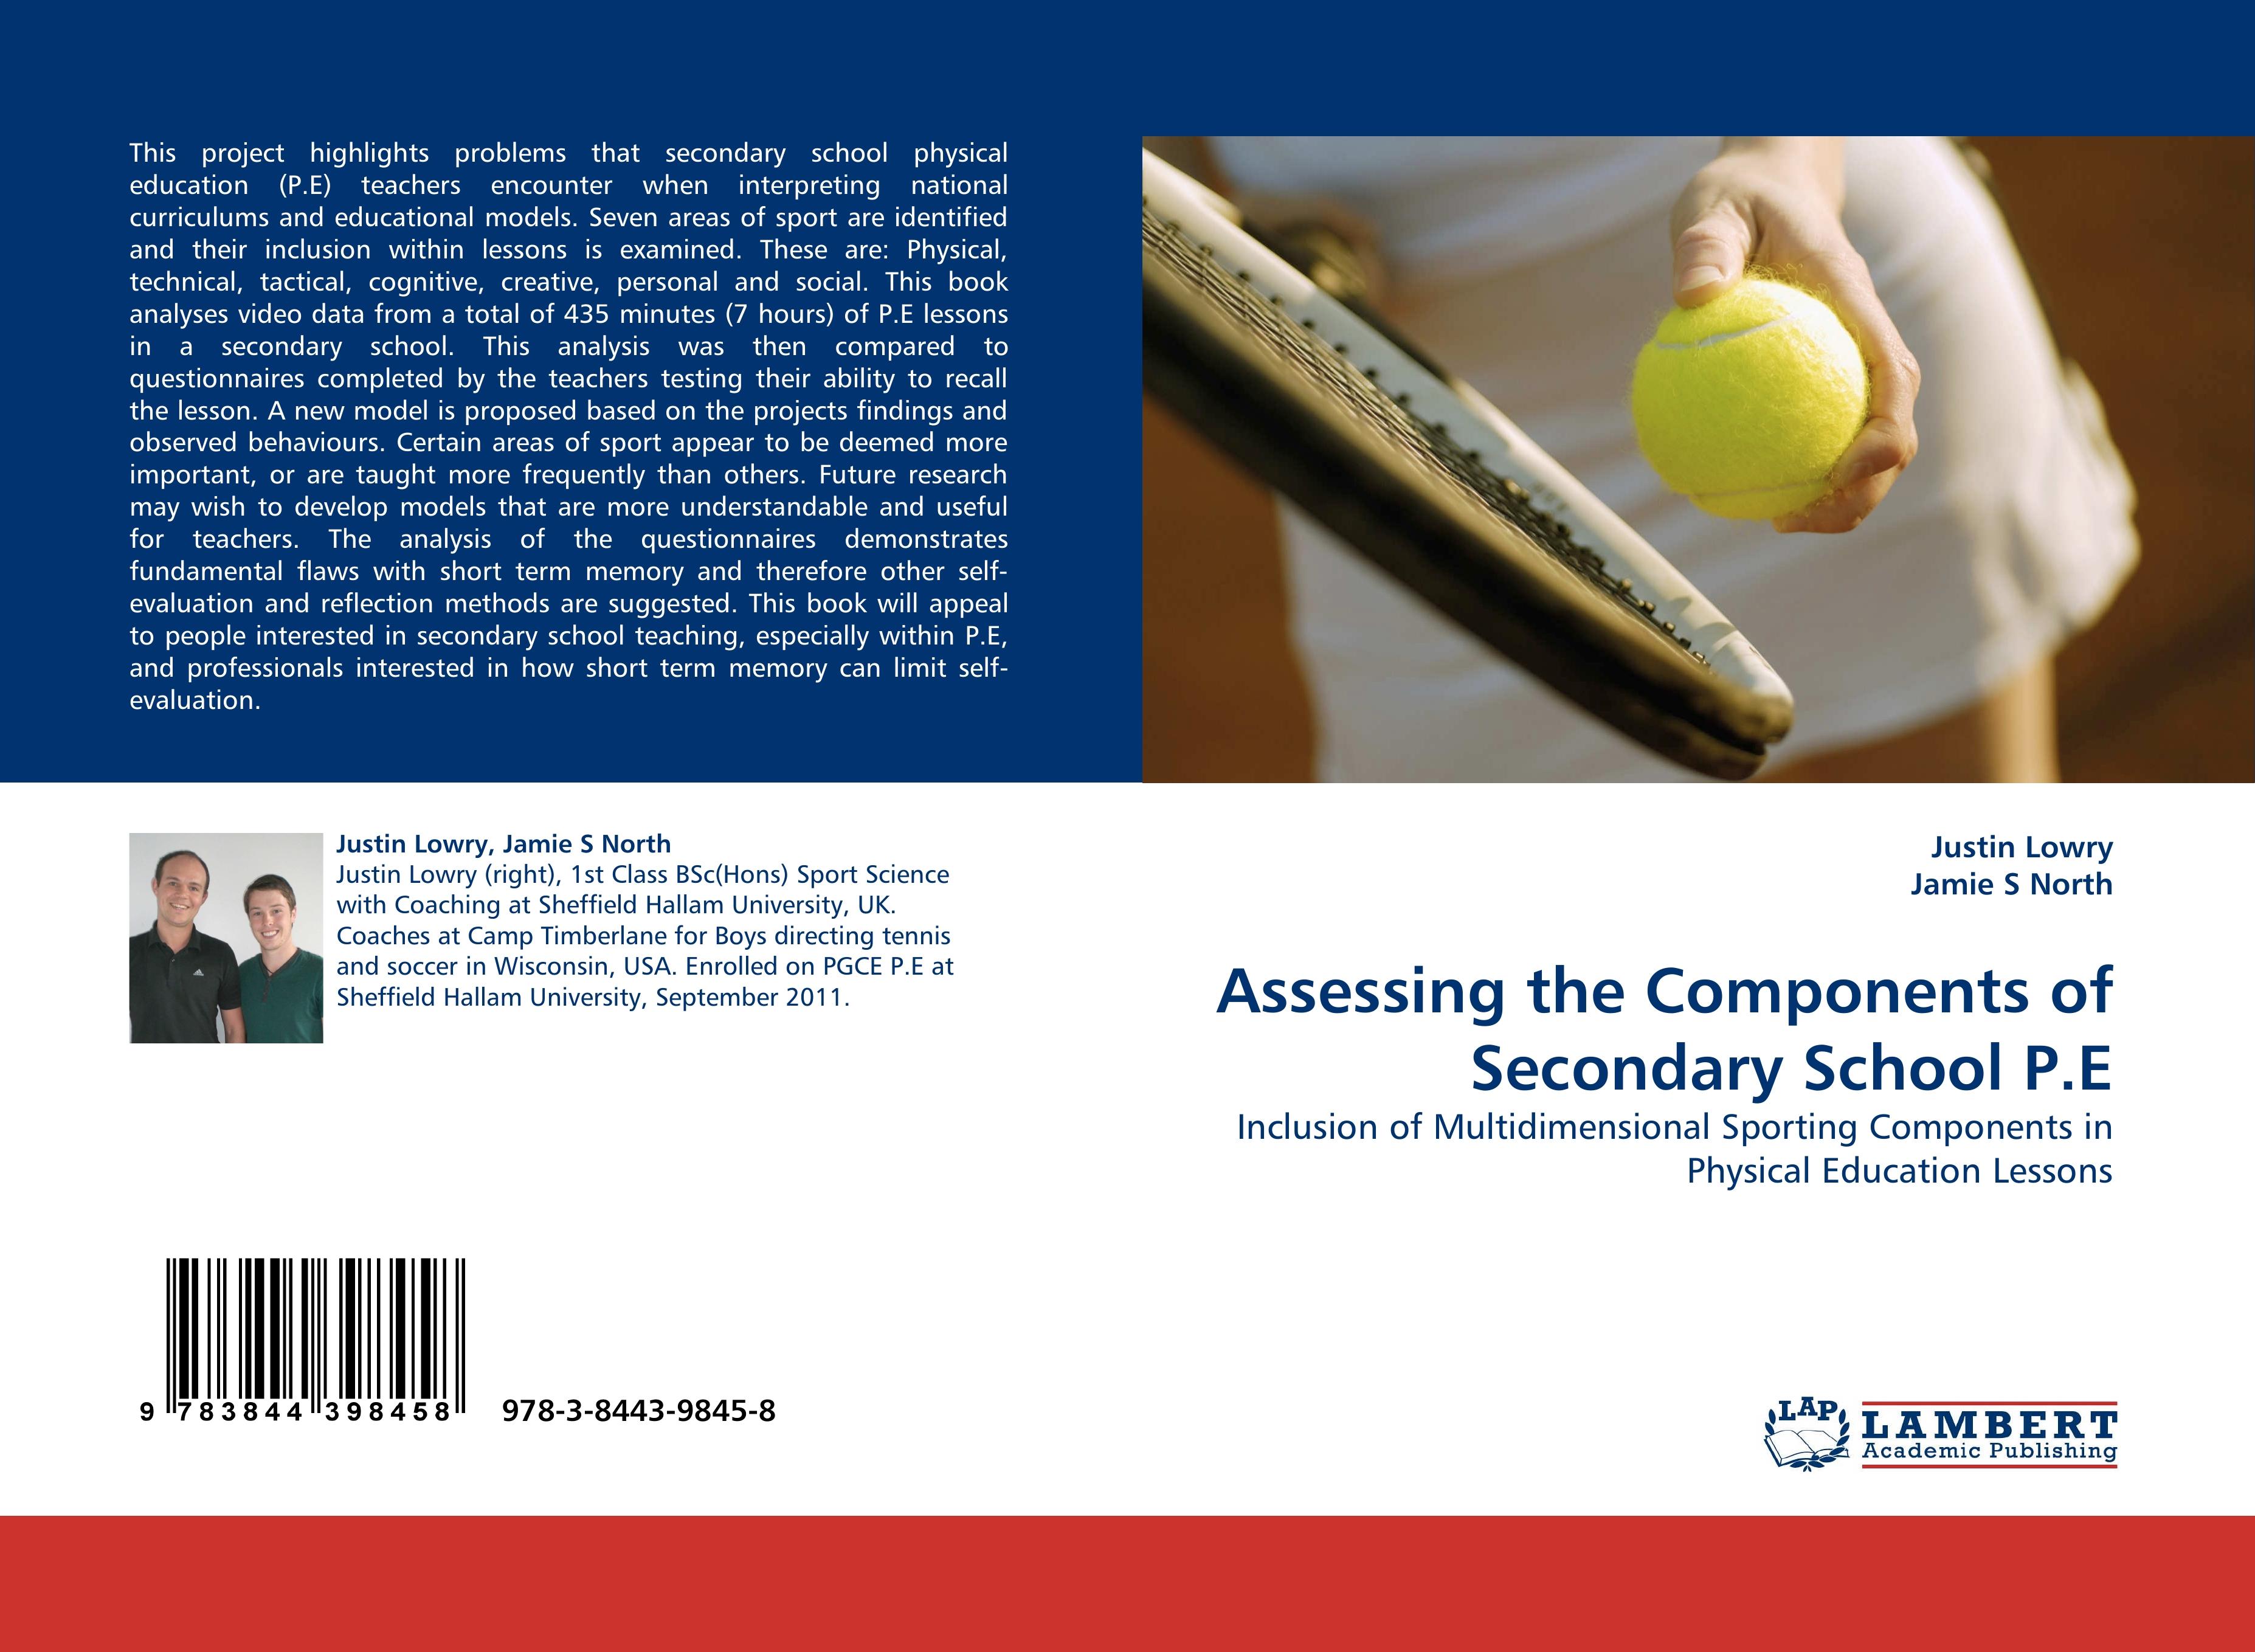 Assessing the Components of Secondary School P.E - Justin Lowry|Jamie S North